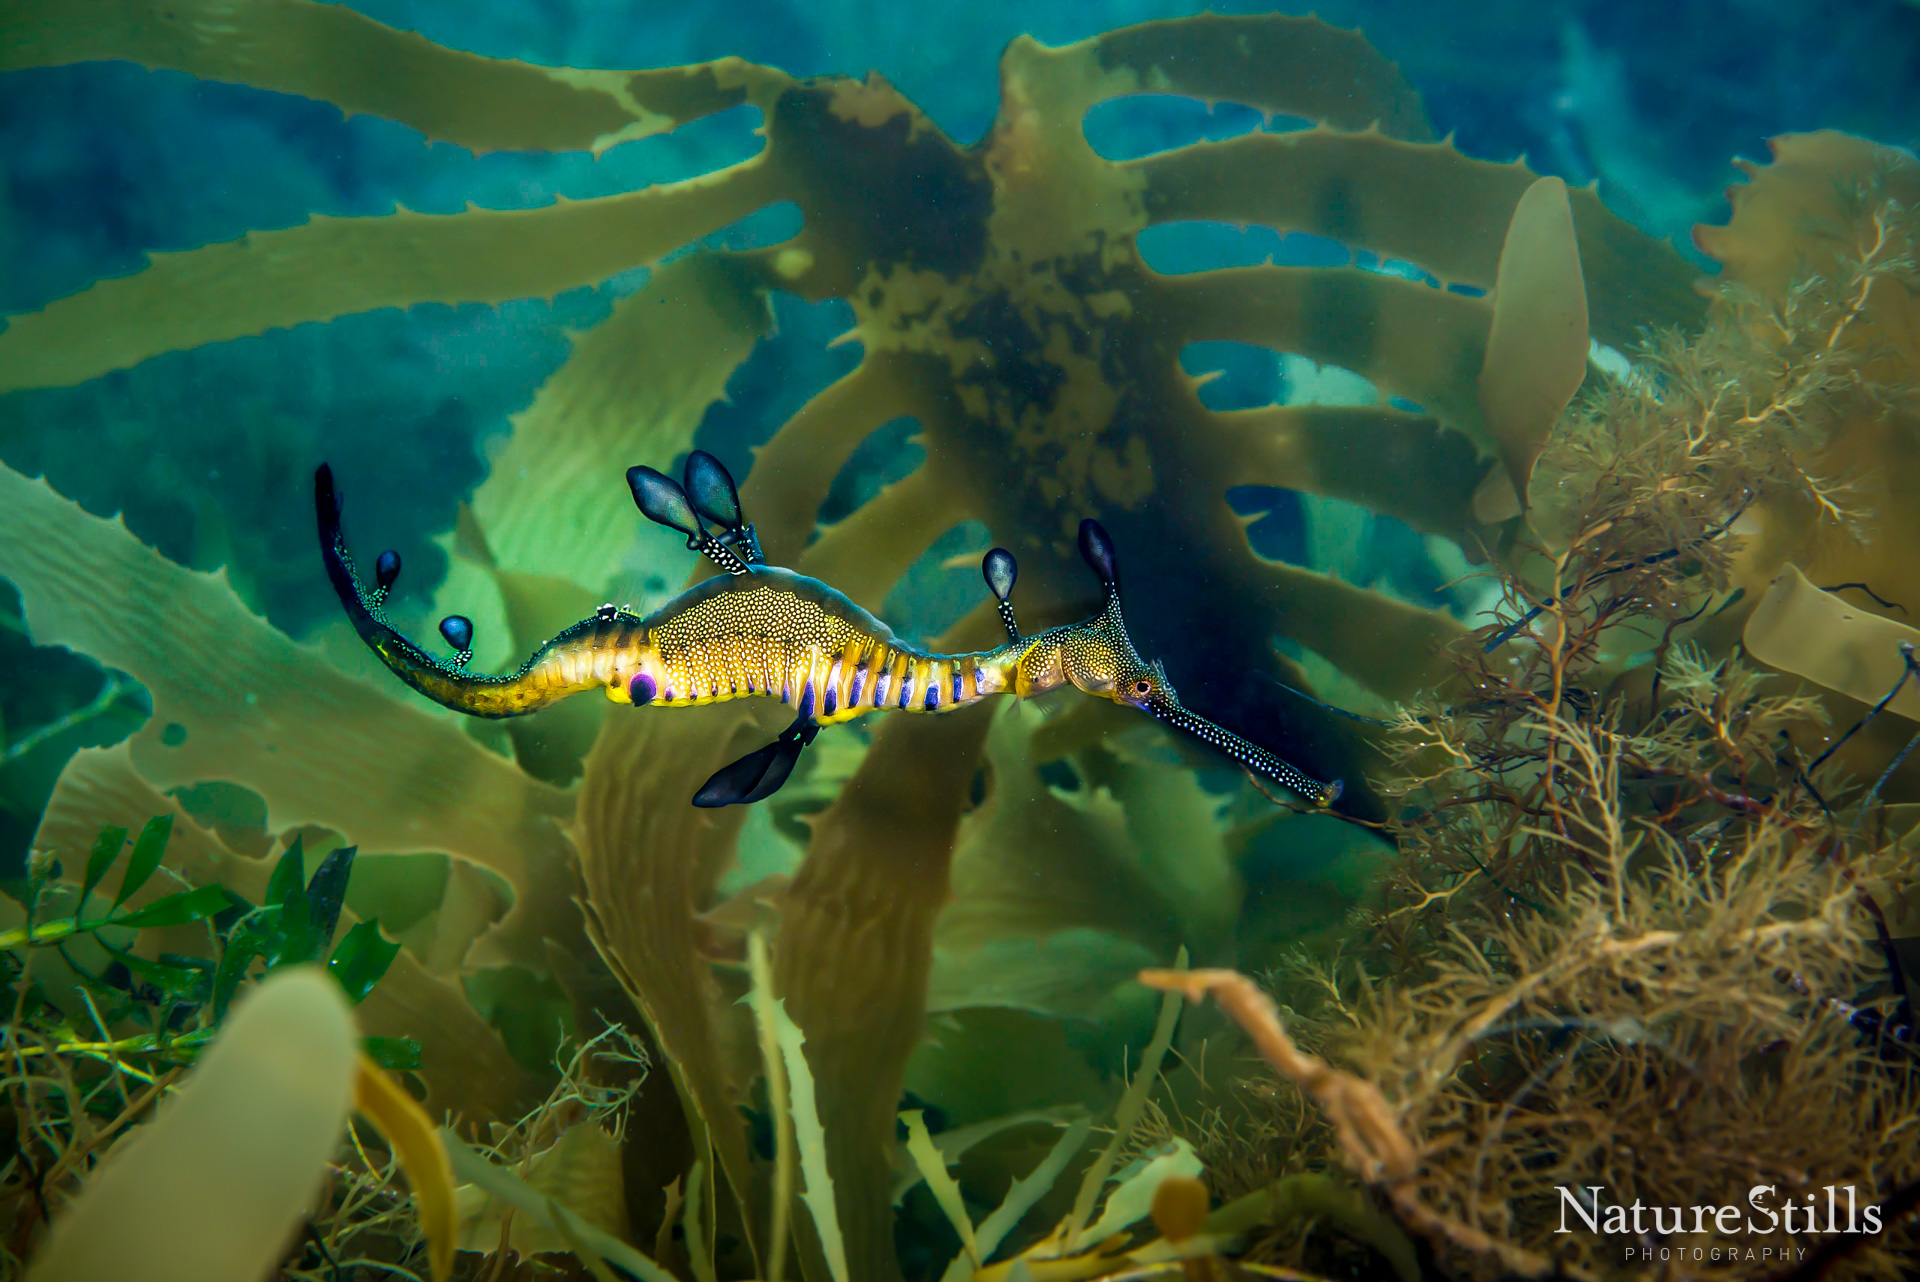 I took the plunge into the chilled waters off Melbourne, Australia expecting to get lucky and maybe see 1-2 Weedy Sea Dragons. I soon found out that no luck was required! We easily saw 15 of these incredible critters in under an hour. 
I usually avoid any activity anywhere cold, but this dive was more than worth it